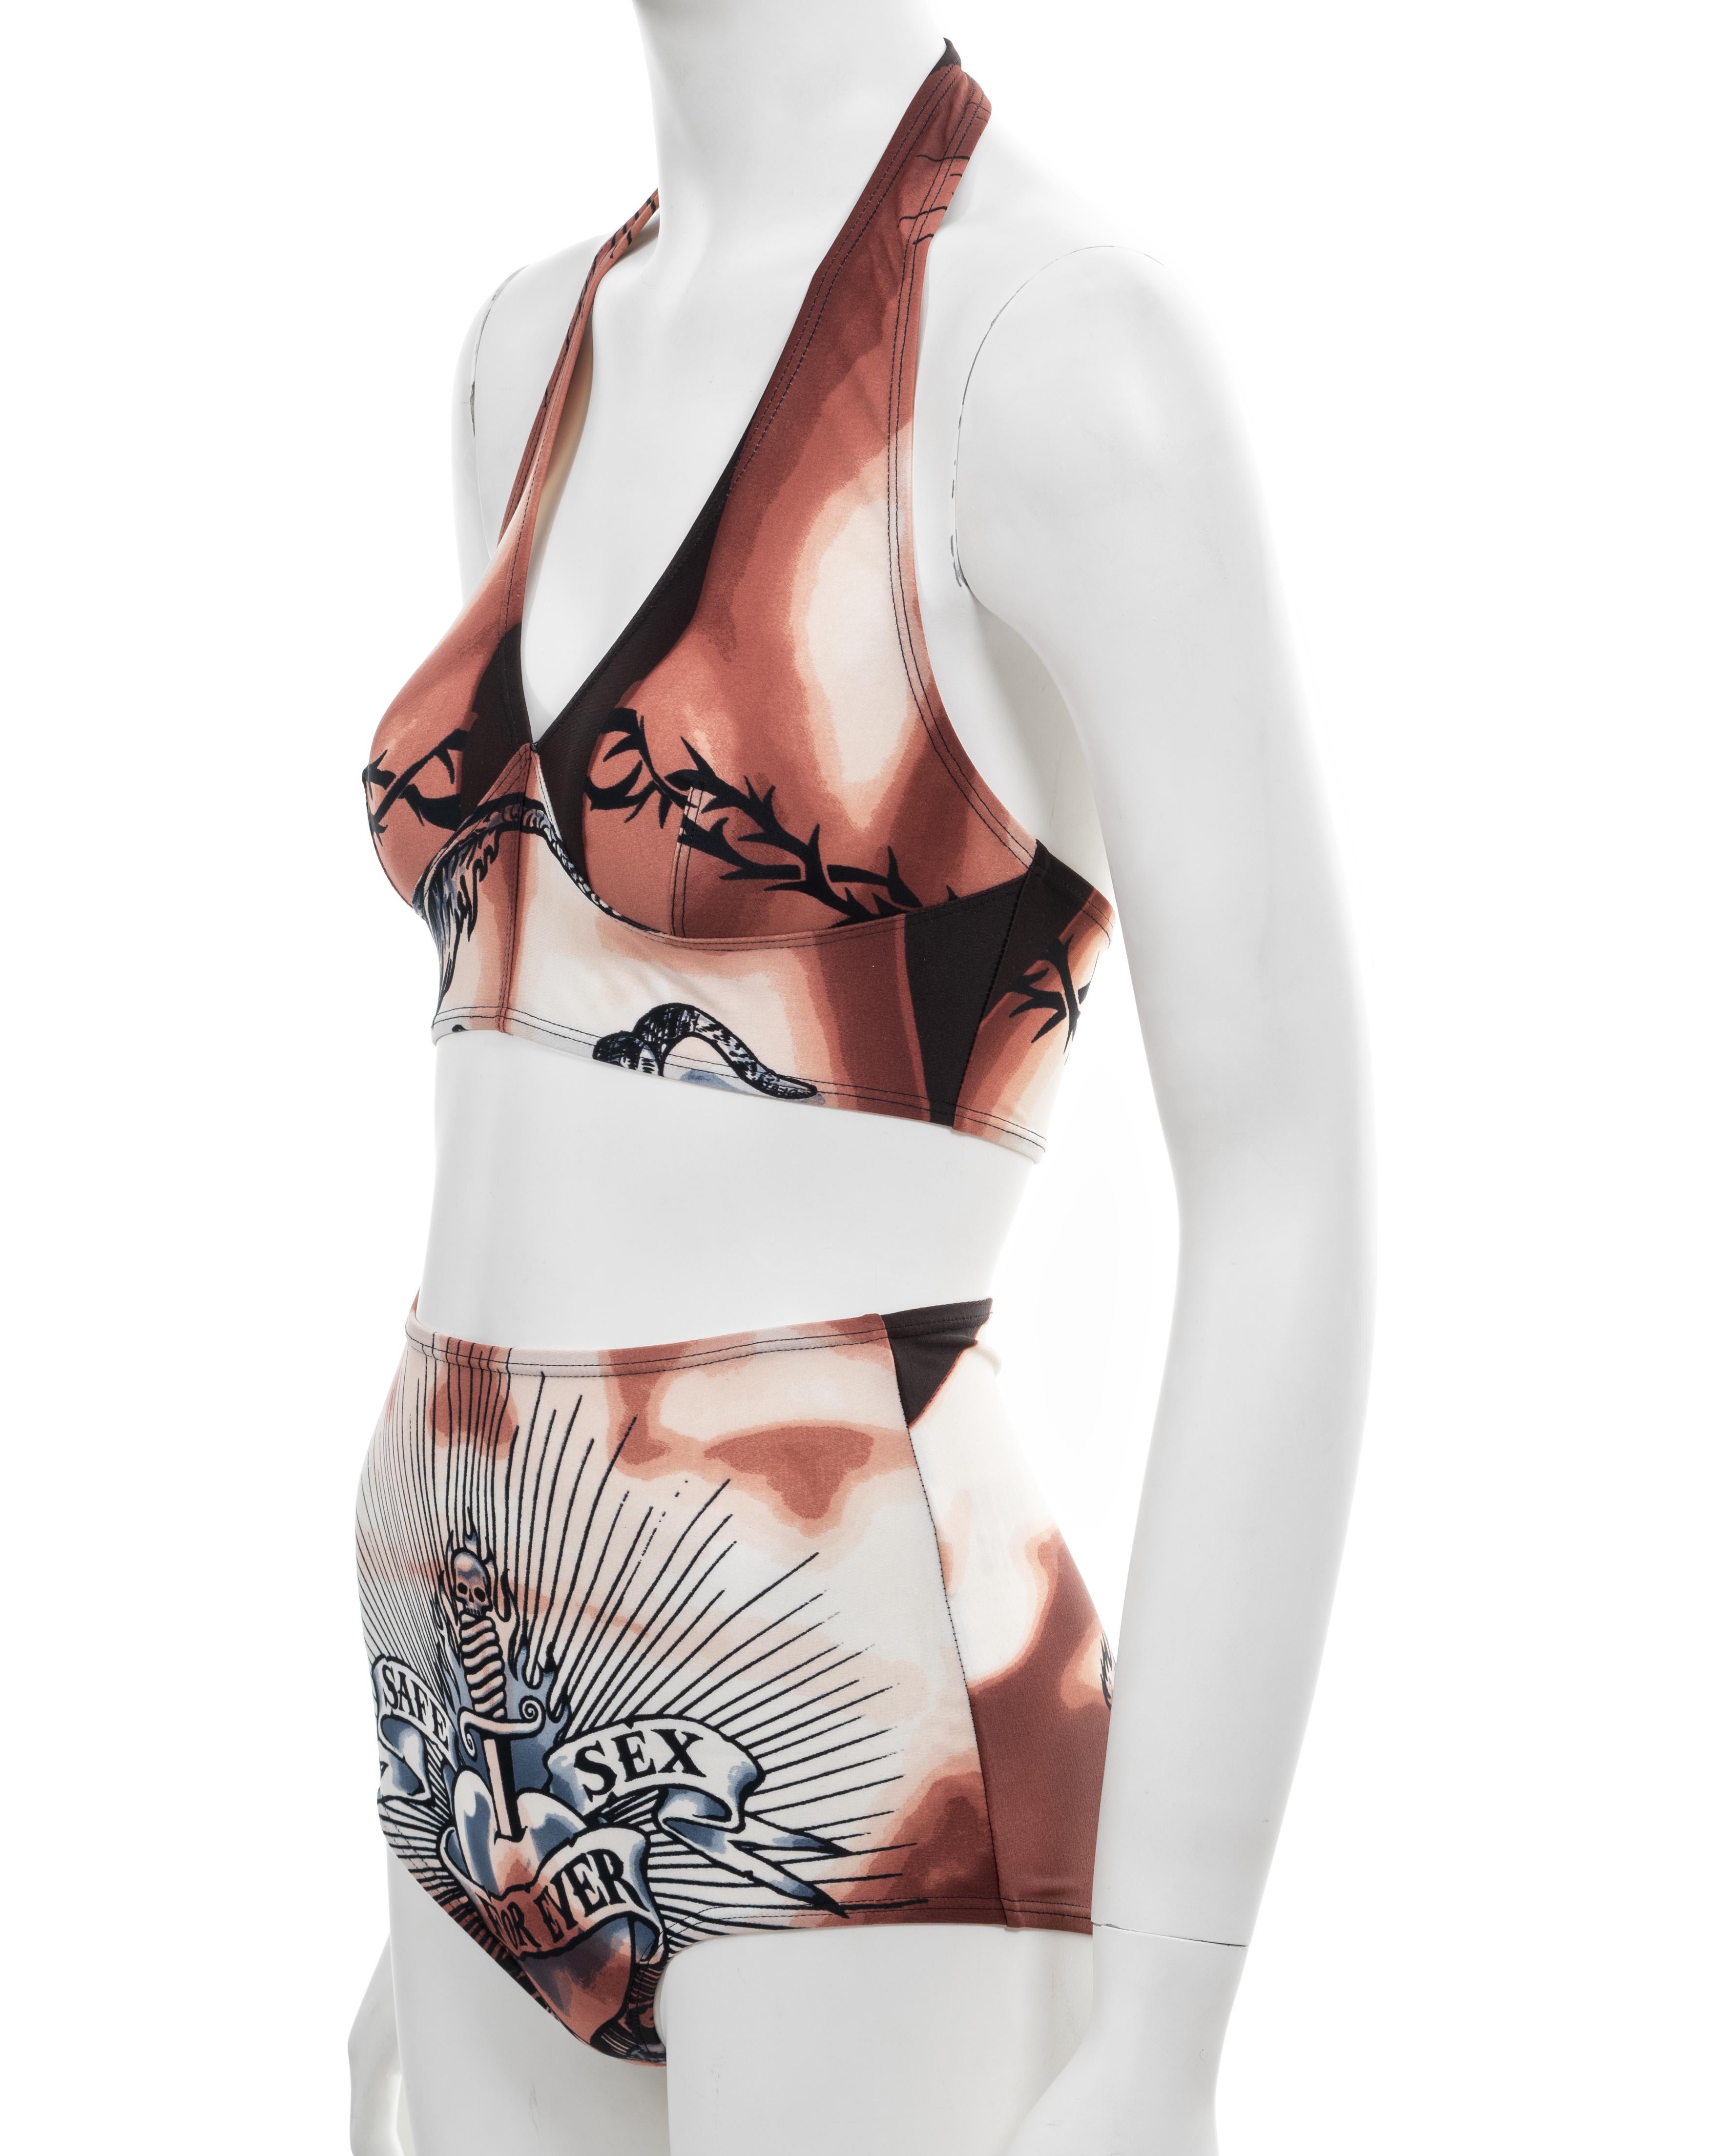 Jean Paul Gaultier 'Safe Sex Forever' tattoo print 2 piece set, ss 1996 For Sale 6